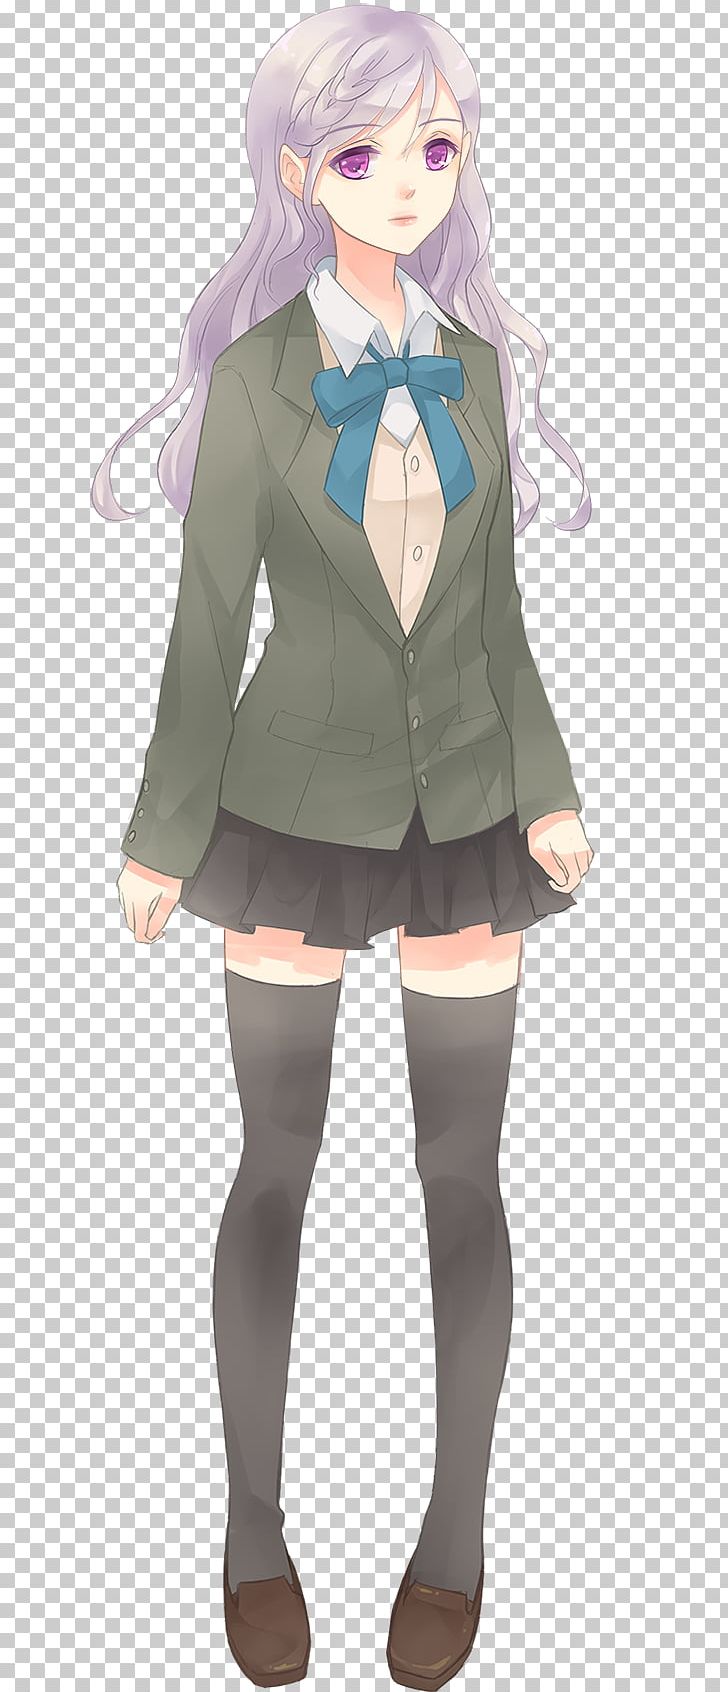 School Uniform Character Student Share-alike PNG, Clipart, Anime, Attribution, Brown Hair, Character, Clothing Free PNG Download